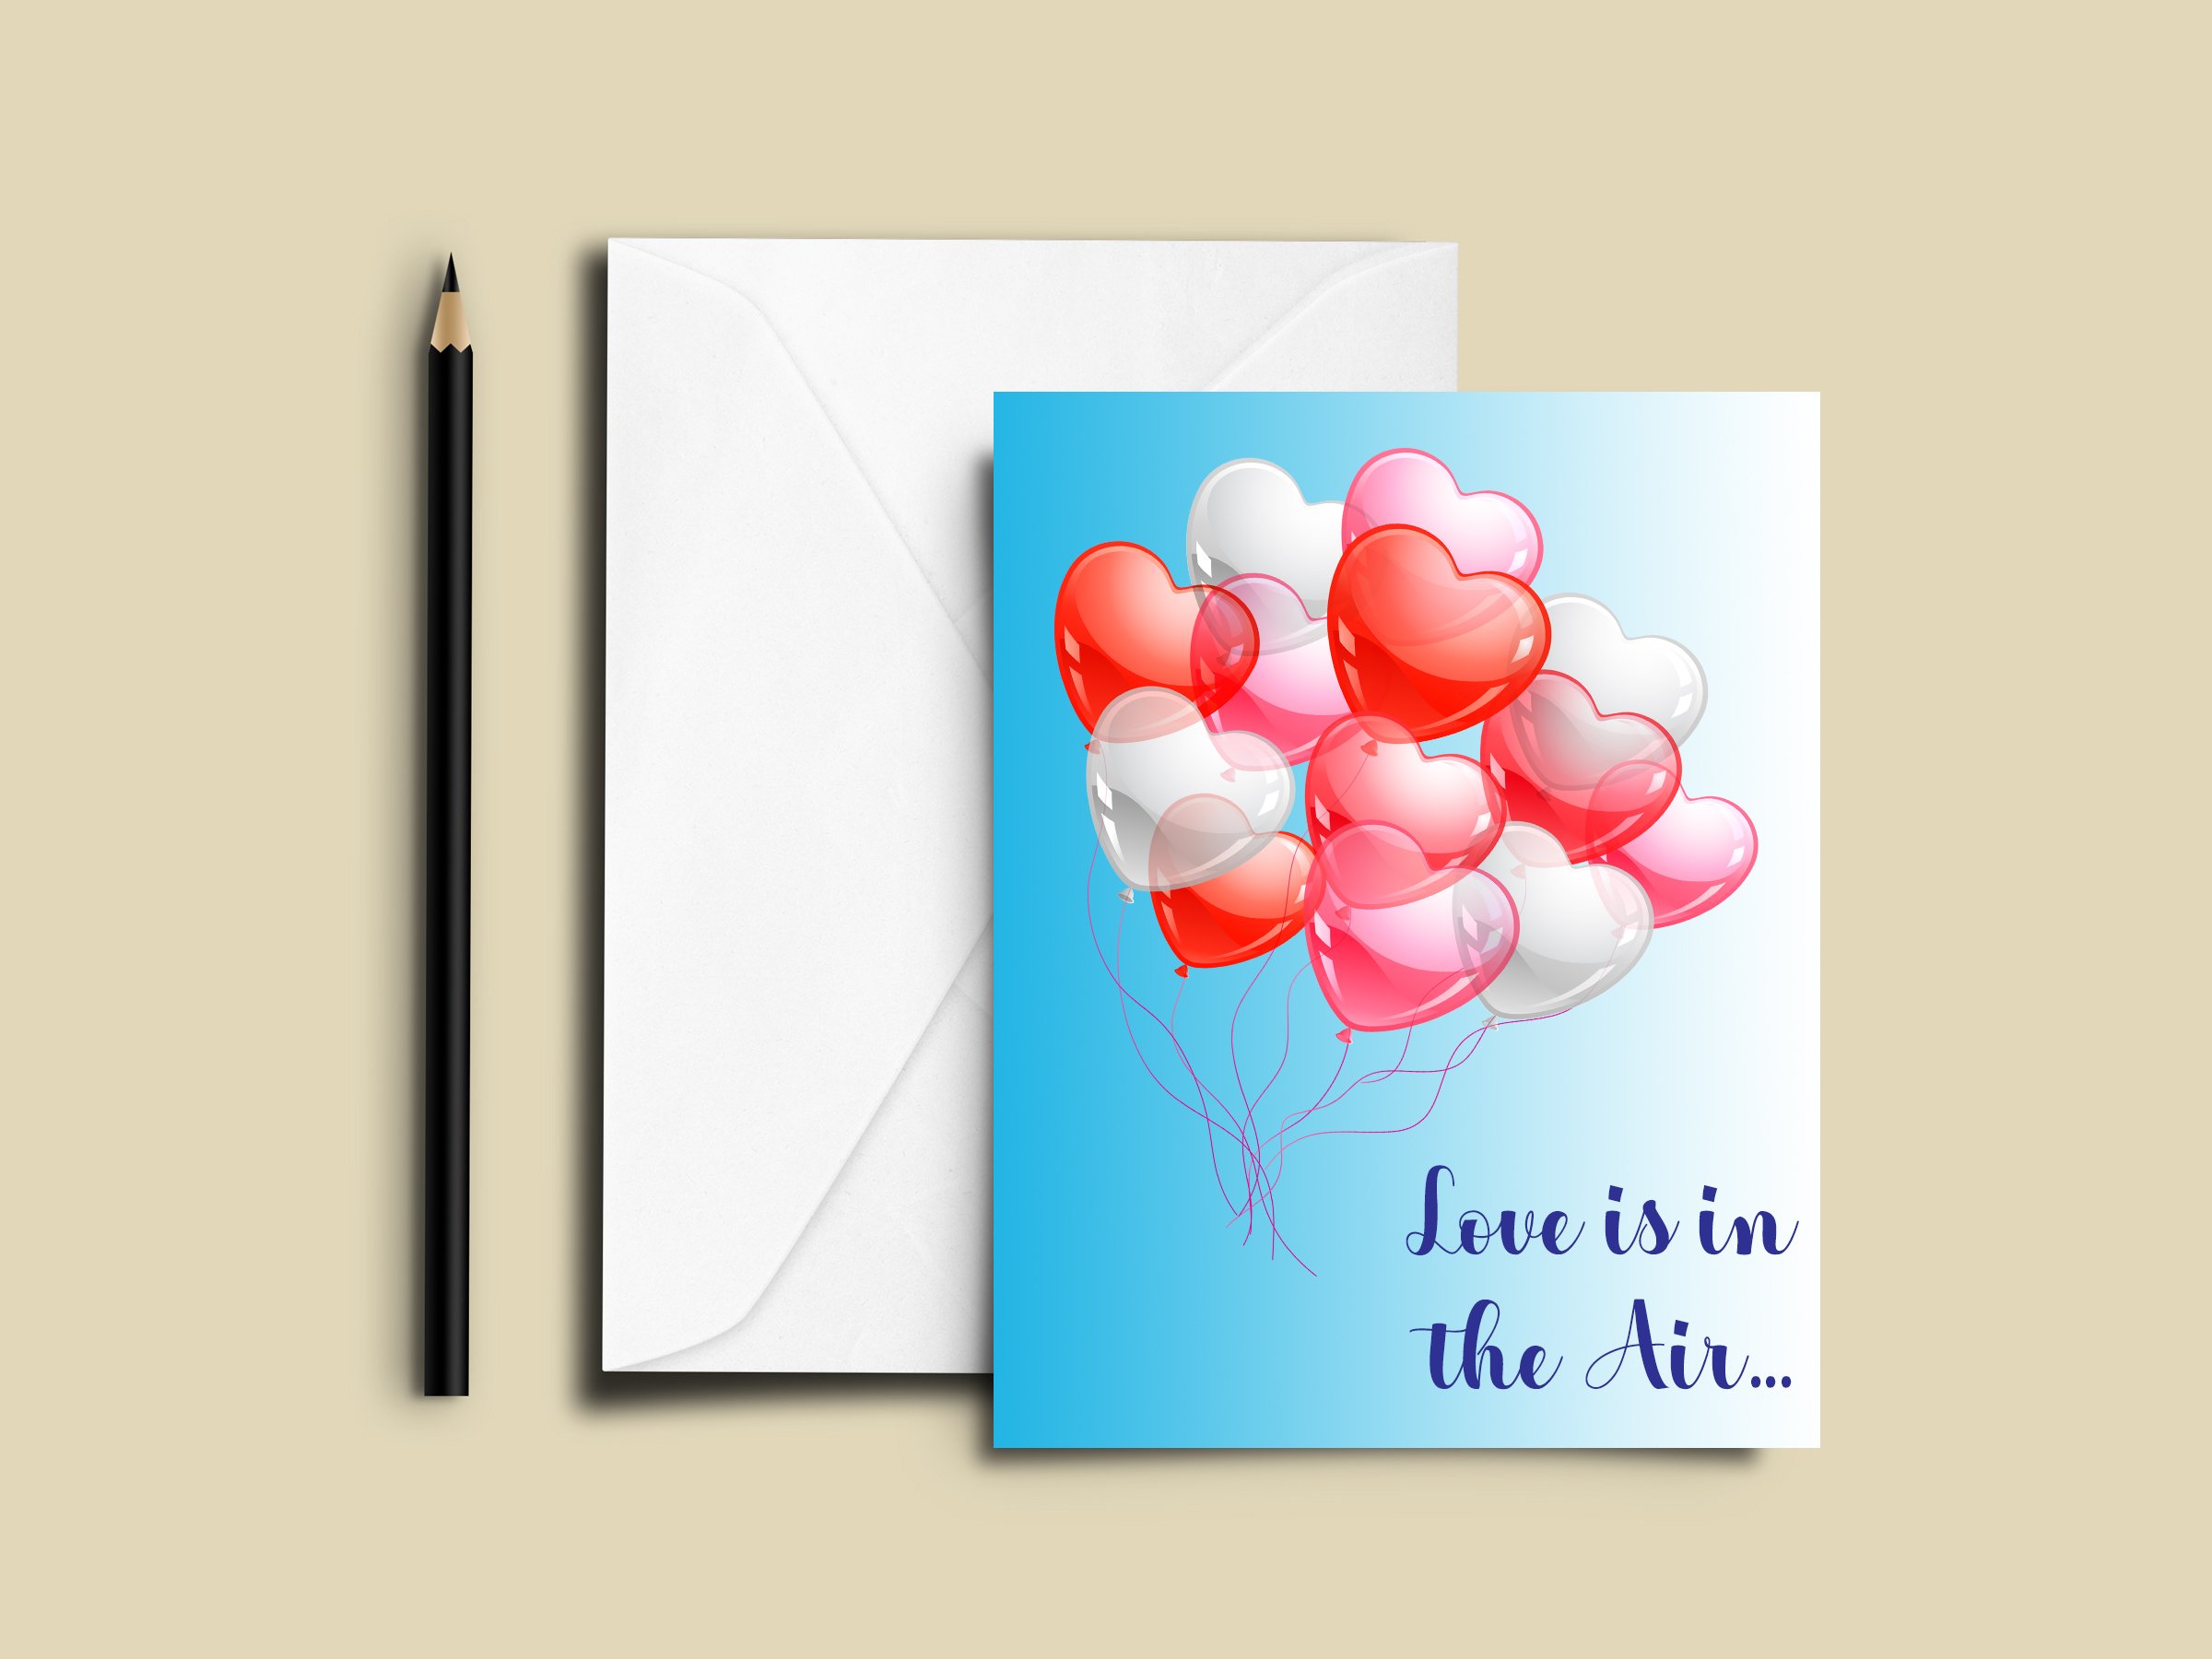 Cute greeting cards with heart balloons.